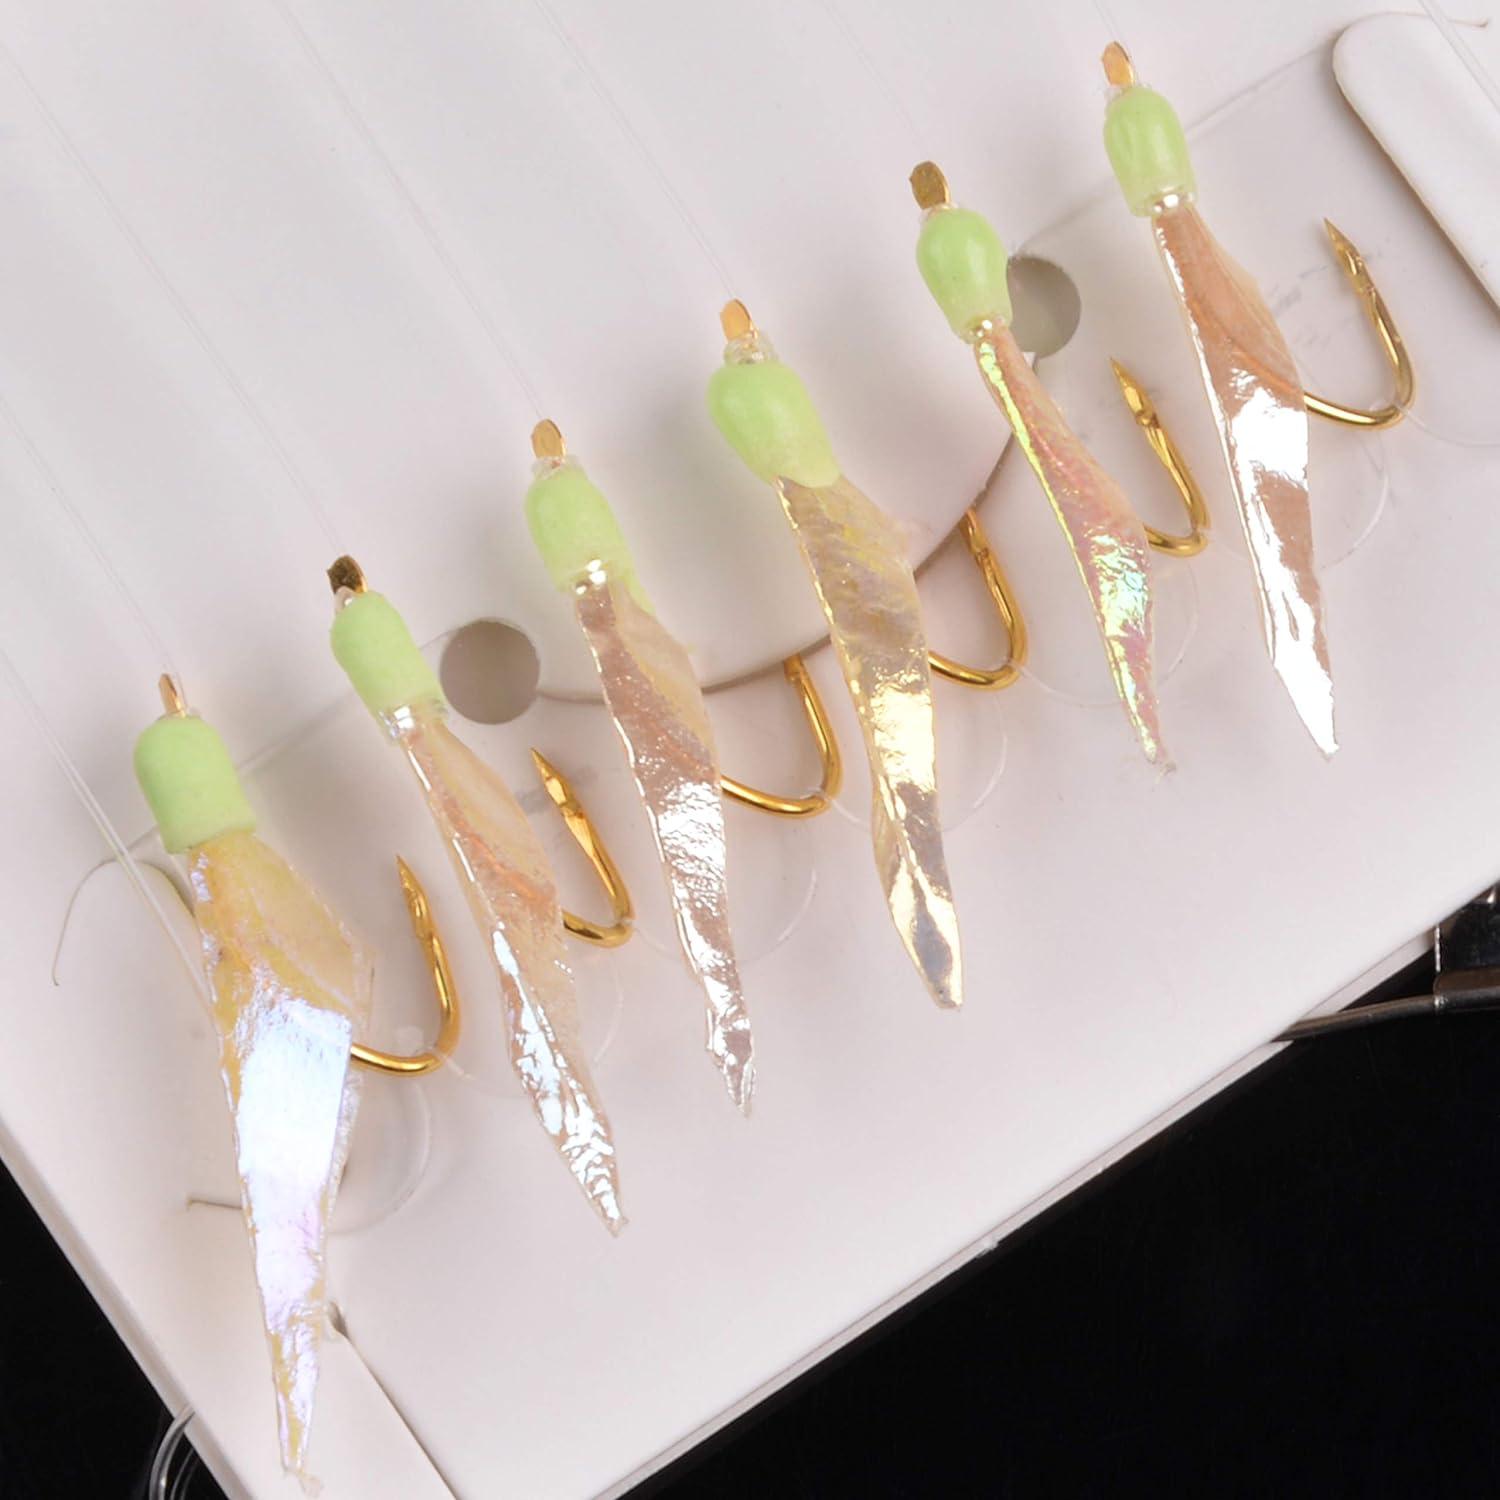 Fishing Rigs Saltwater Bait Lures 6 Packs Fishing Bait Rigs with